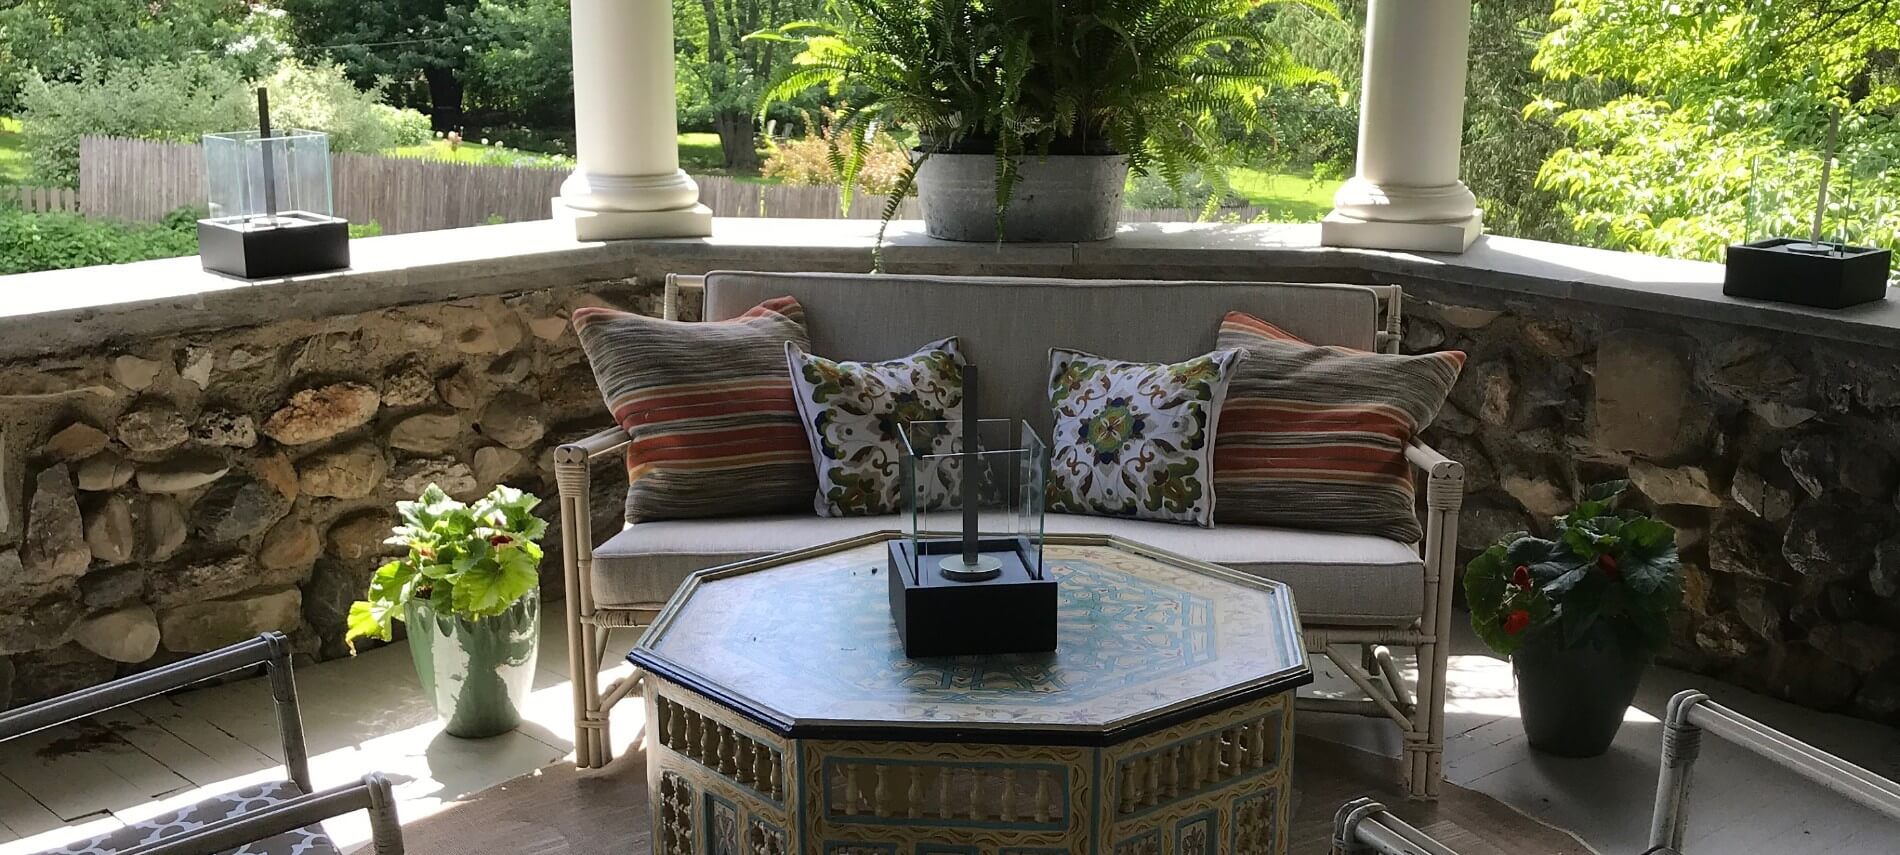 Corner of a stone porch with a wicker loveseat, octagon table and vases with green plants